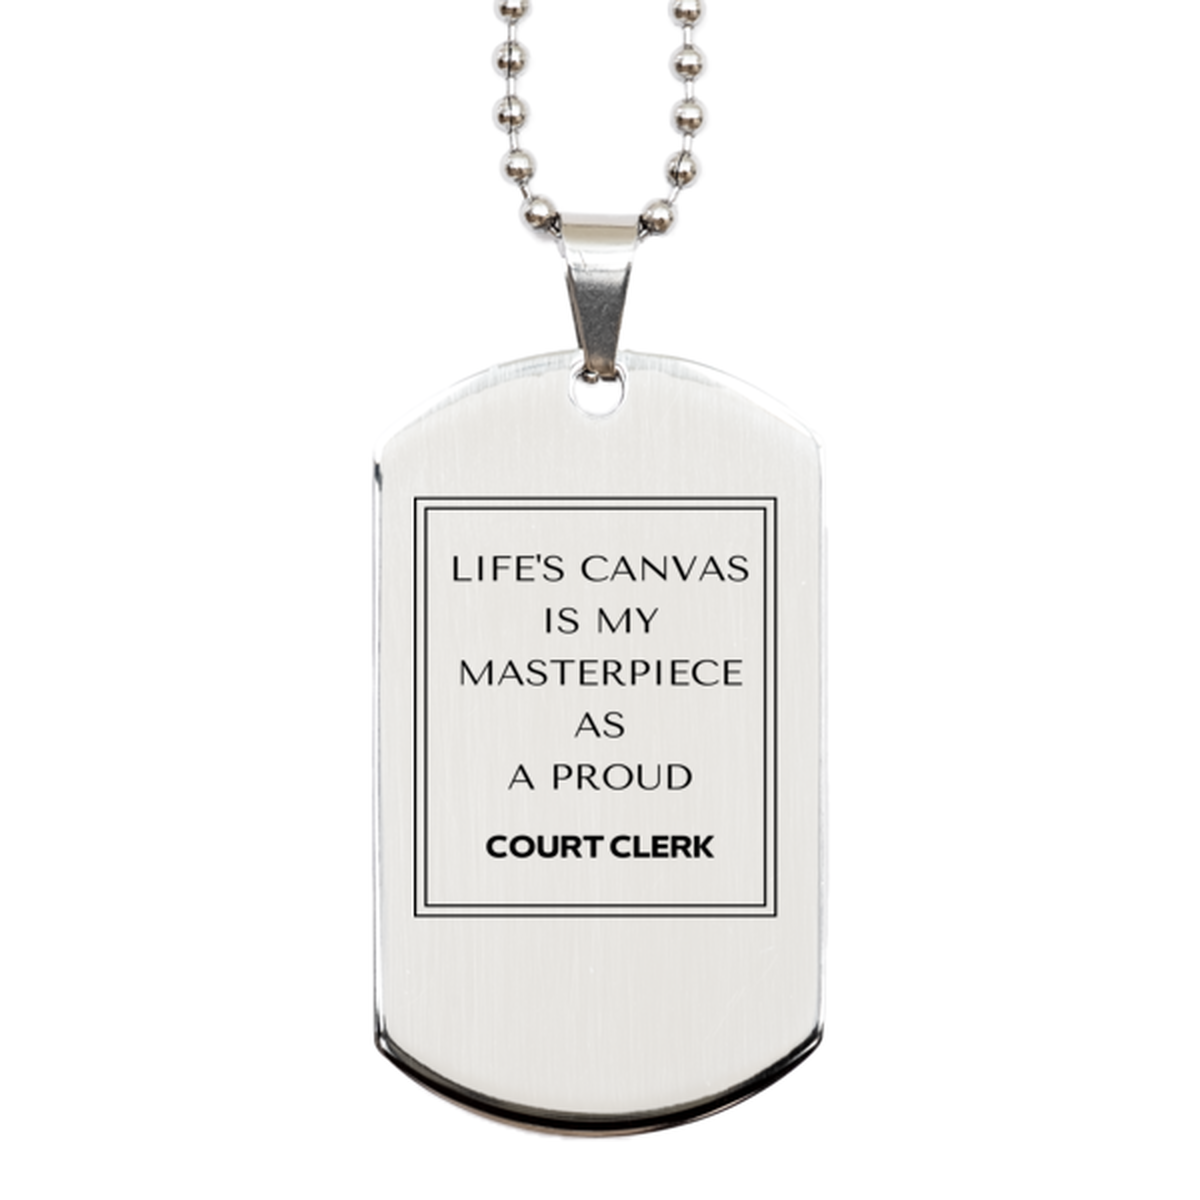 Proud Court Clerk Gifts, Life's canvas is my masterpiece, Epic Birthday Christmas Unique Silver Dog Tag For Court Clerk, Coworkers, Men, Women, Friends